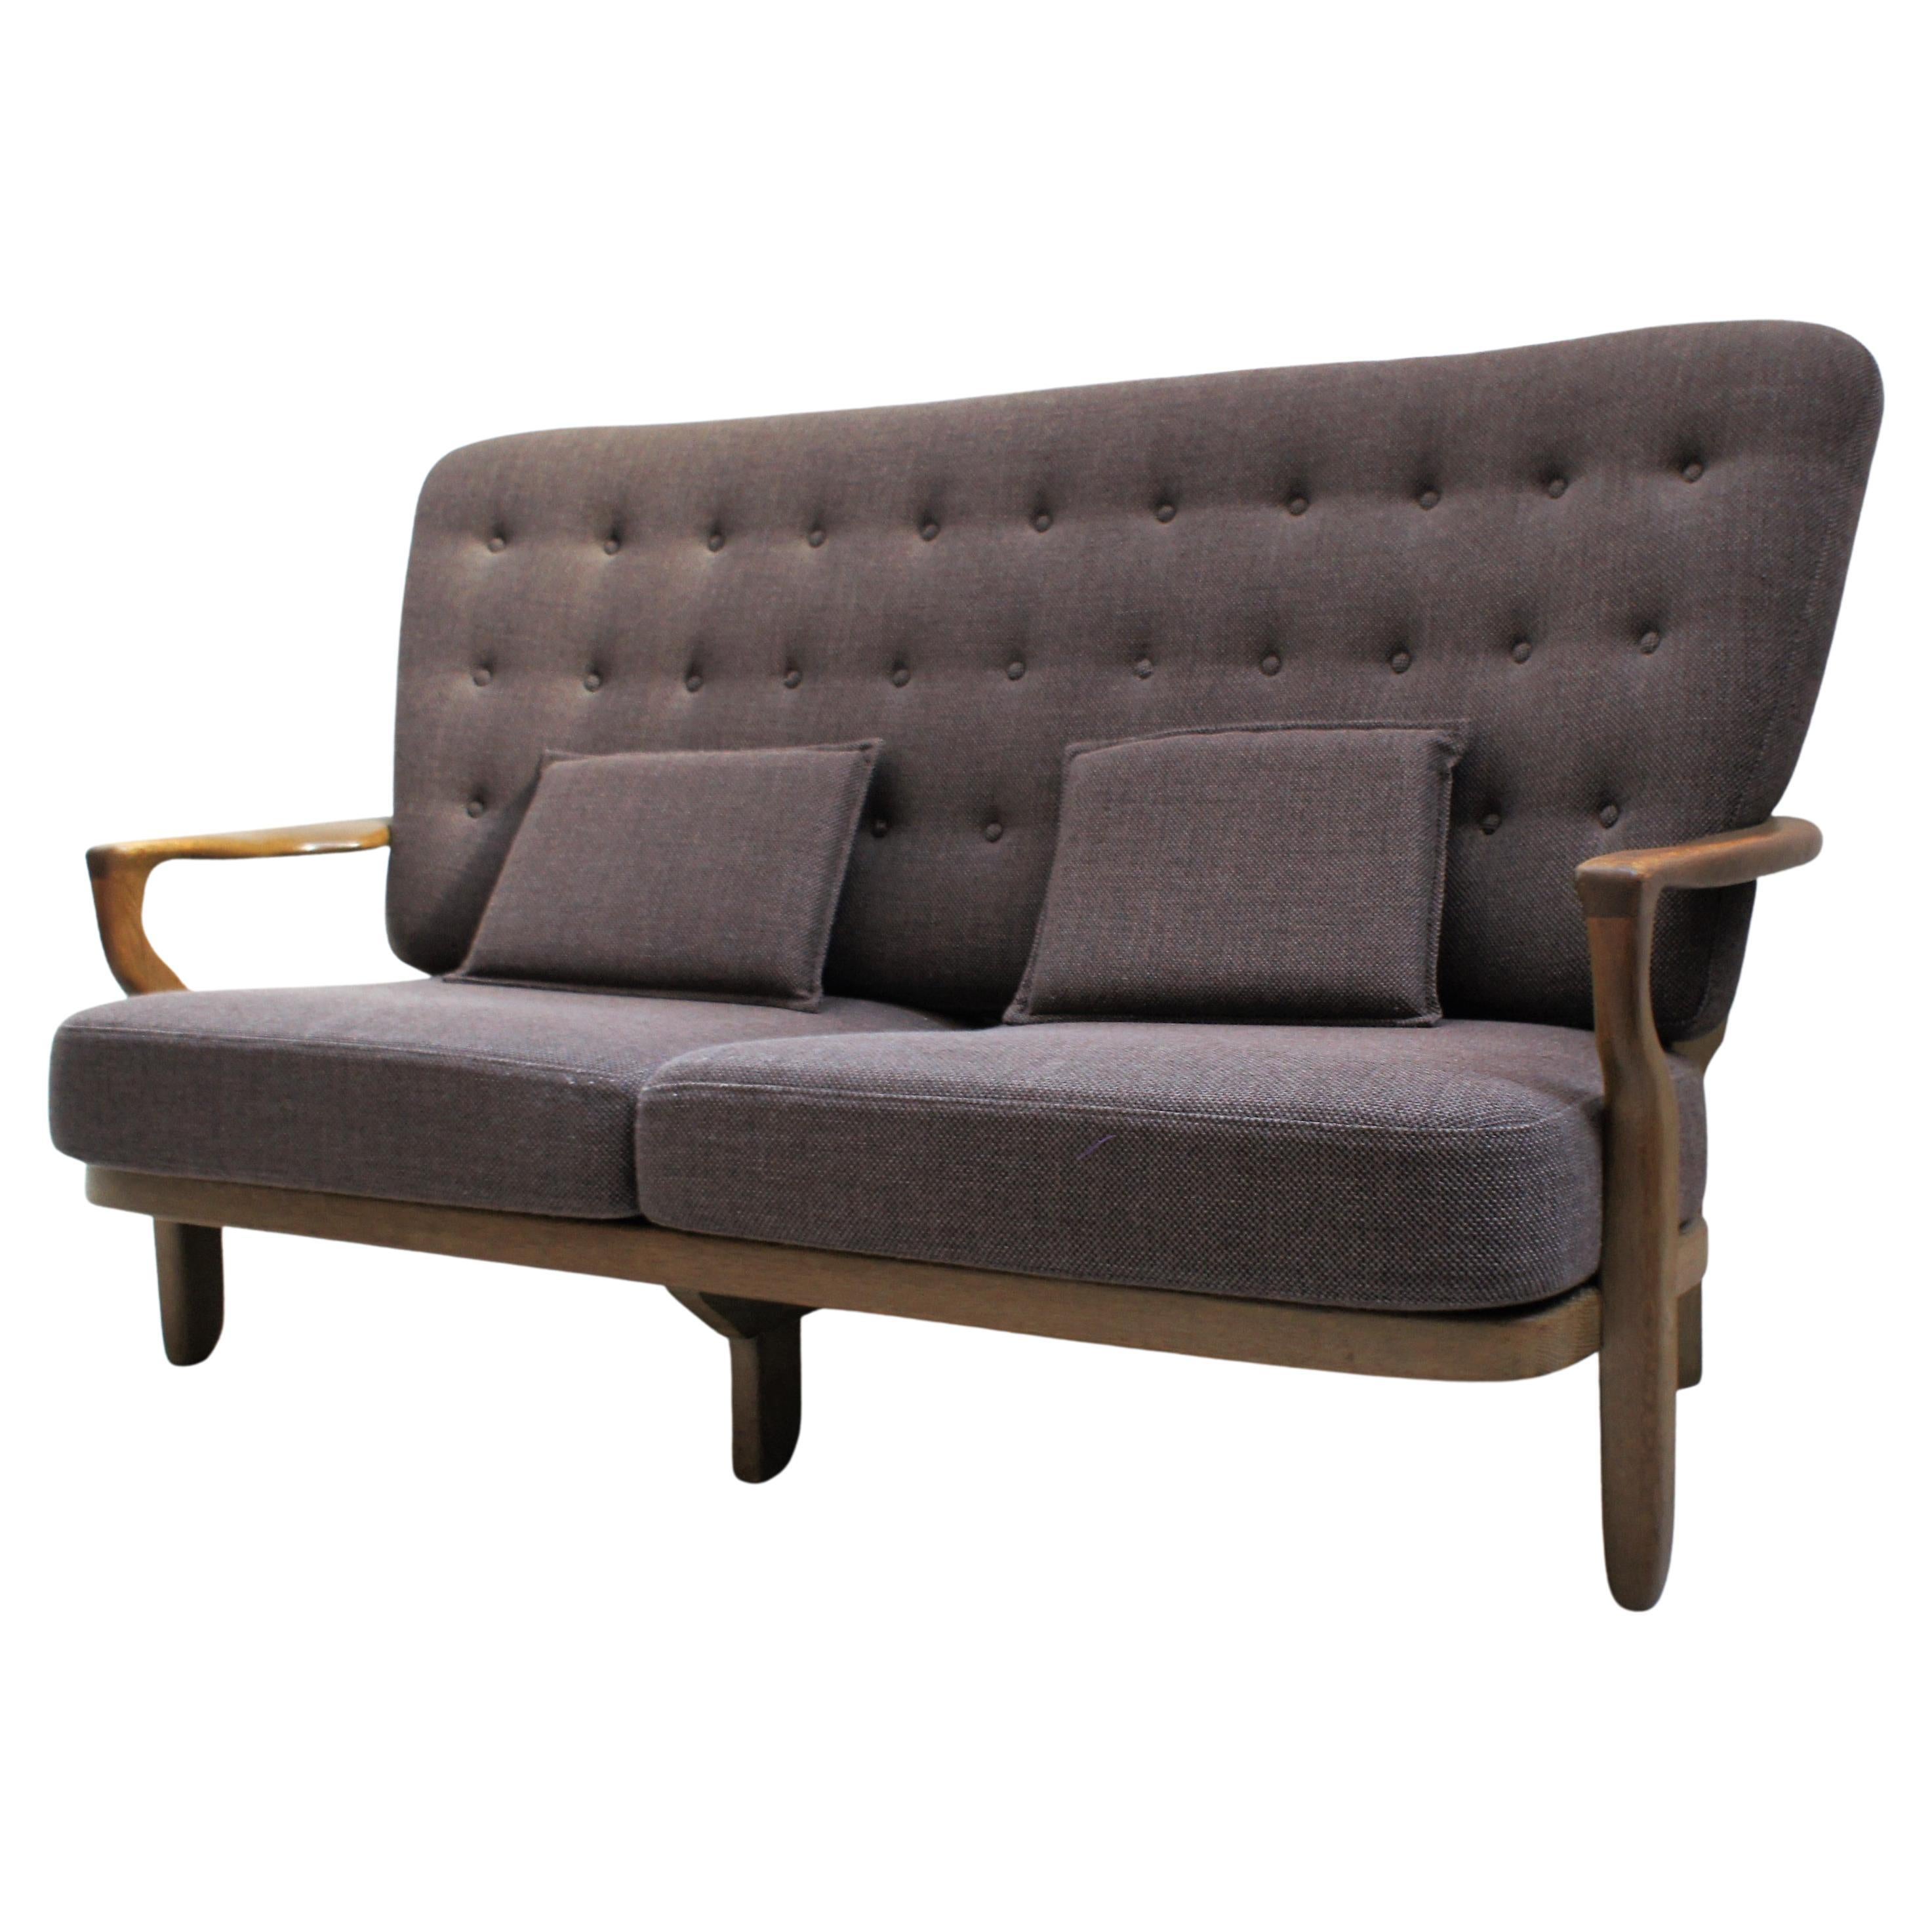 Very Nice Juliette Sofa by Guillerme and Chambron for "Votre Maison" Publisher